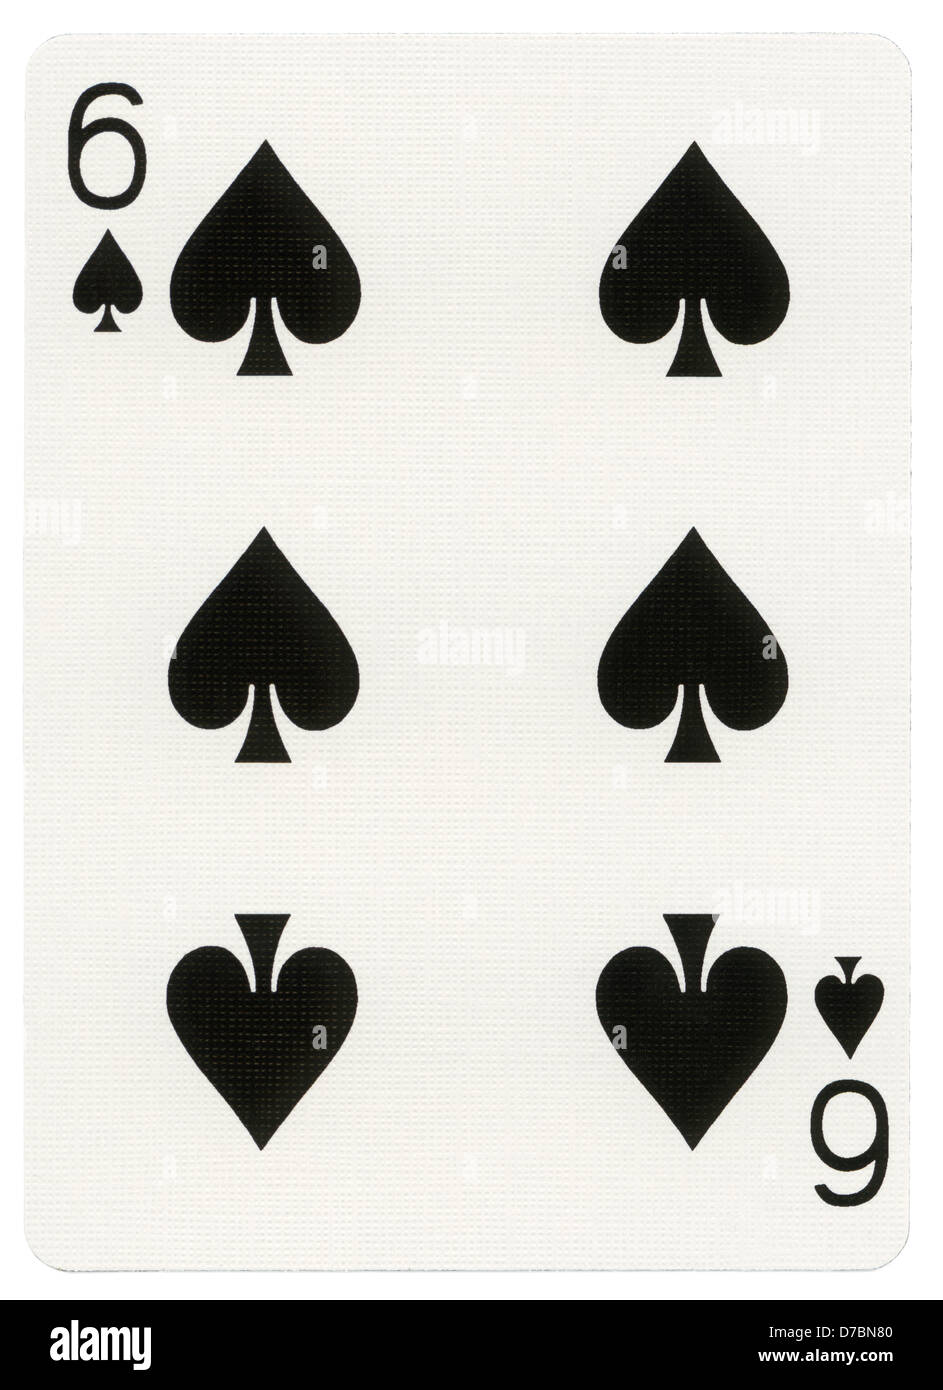 Six of spades playing card, isolated on white background. Scanned at 2400dpi using Epson V700 professional scanner. Stock Photo